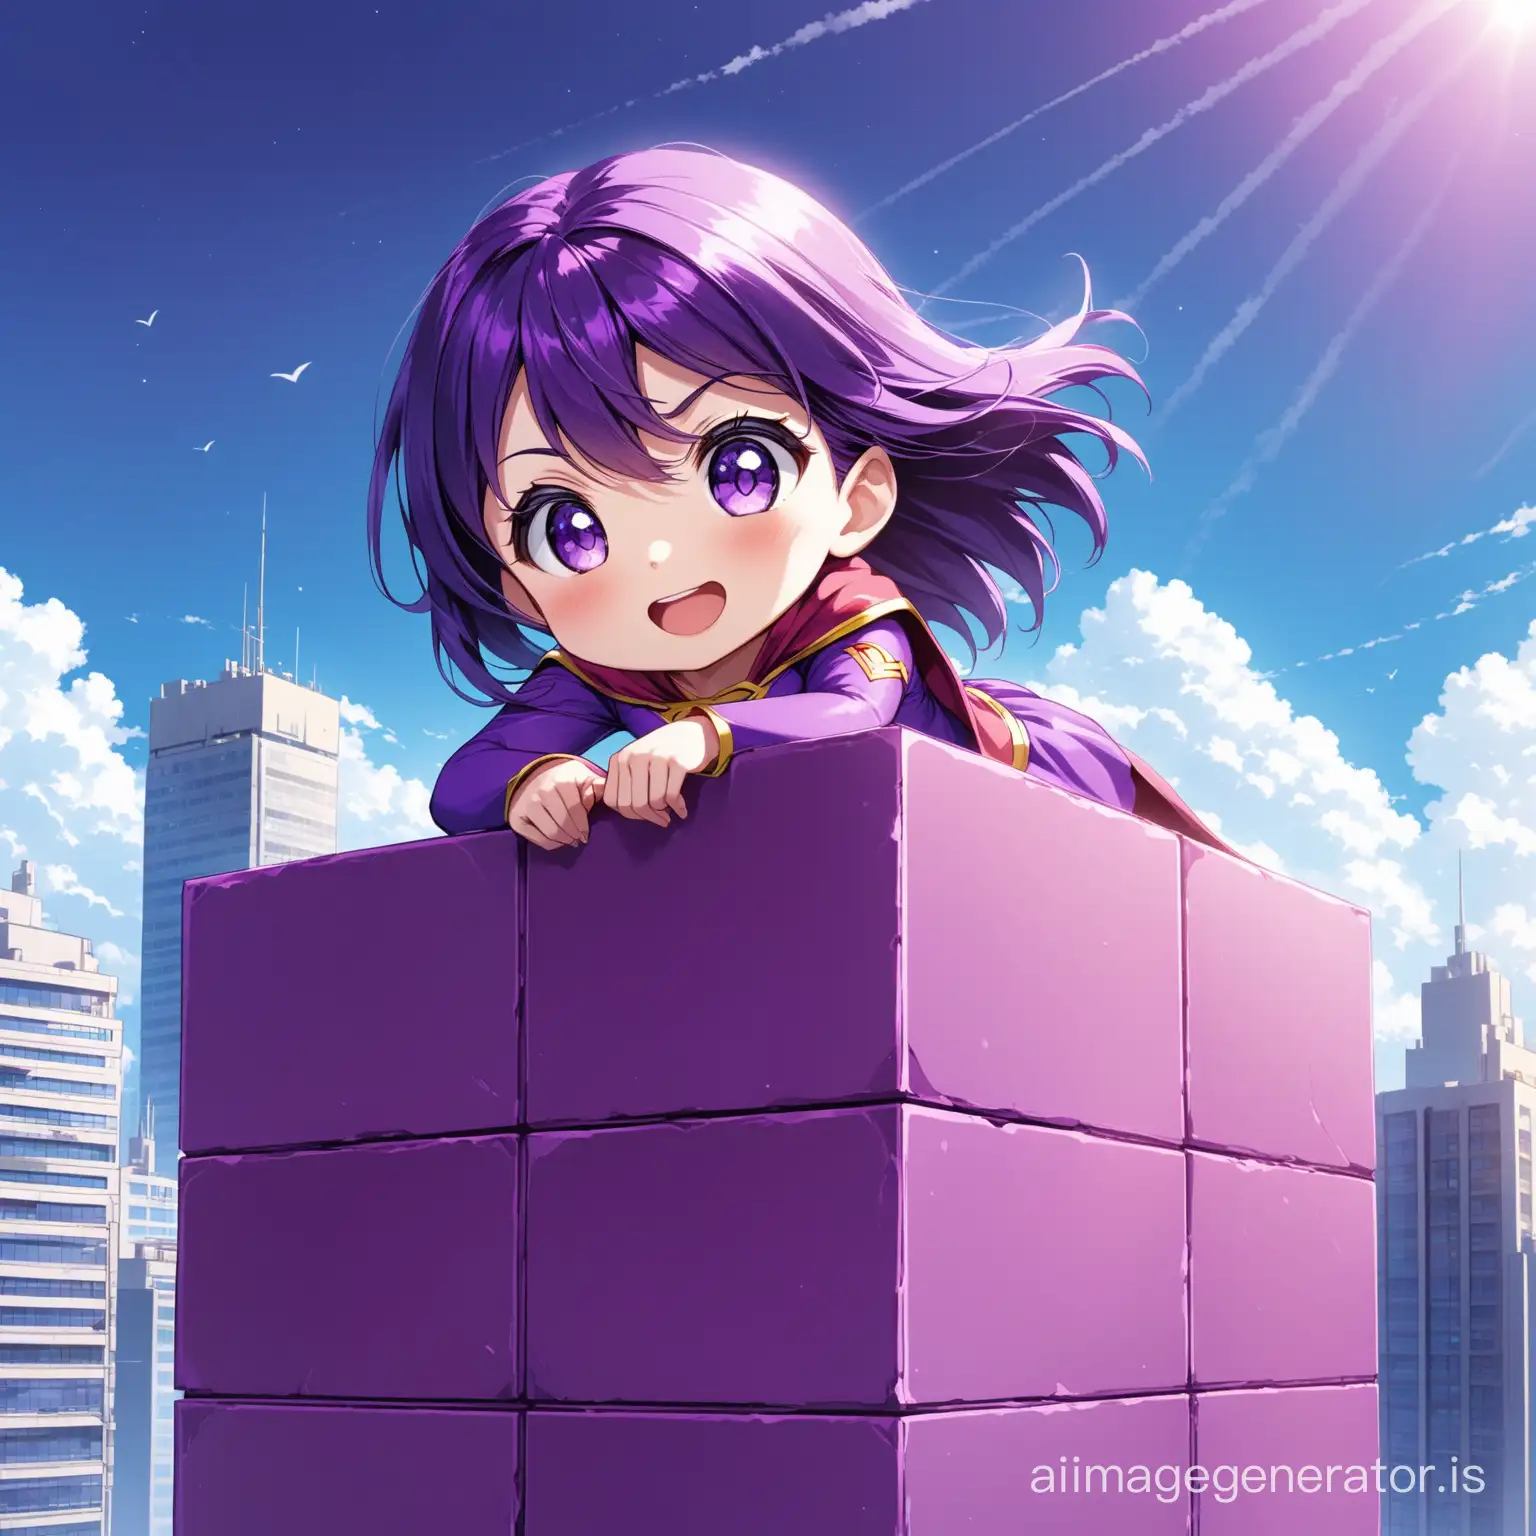 Happy purple Block super girl with purple eyes and mouth.
He is on top of a building and is looking down.
also see purple block can be seen in the sky
Details are evident beautifully and with great precision